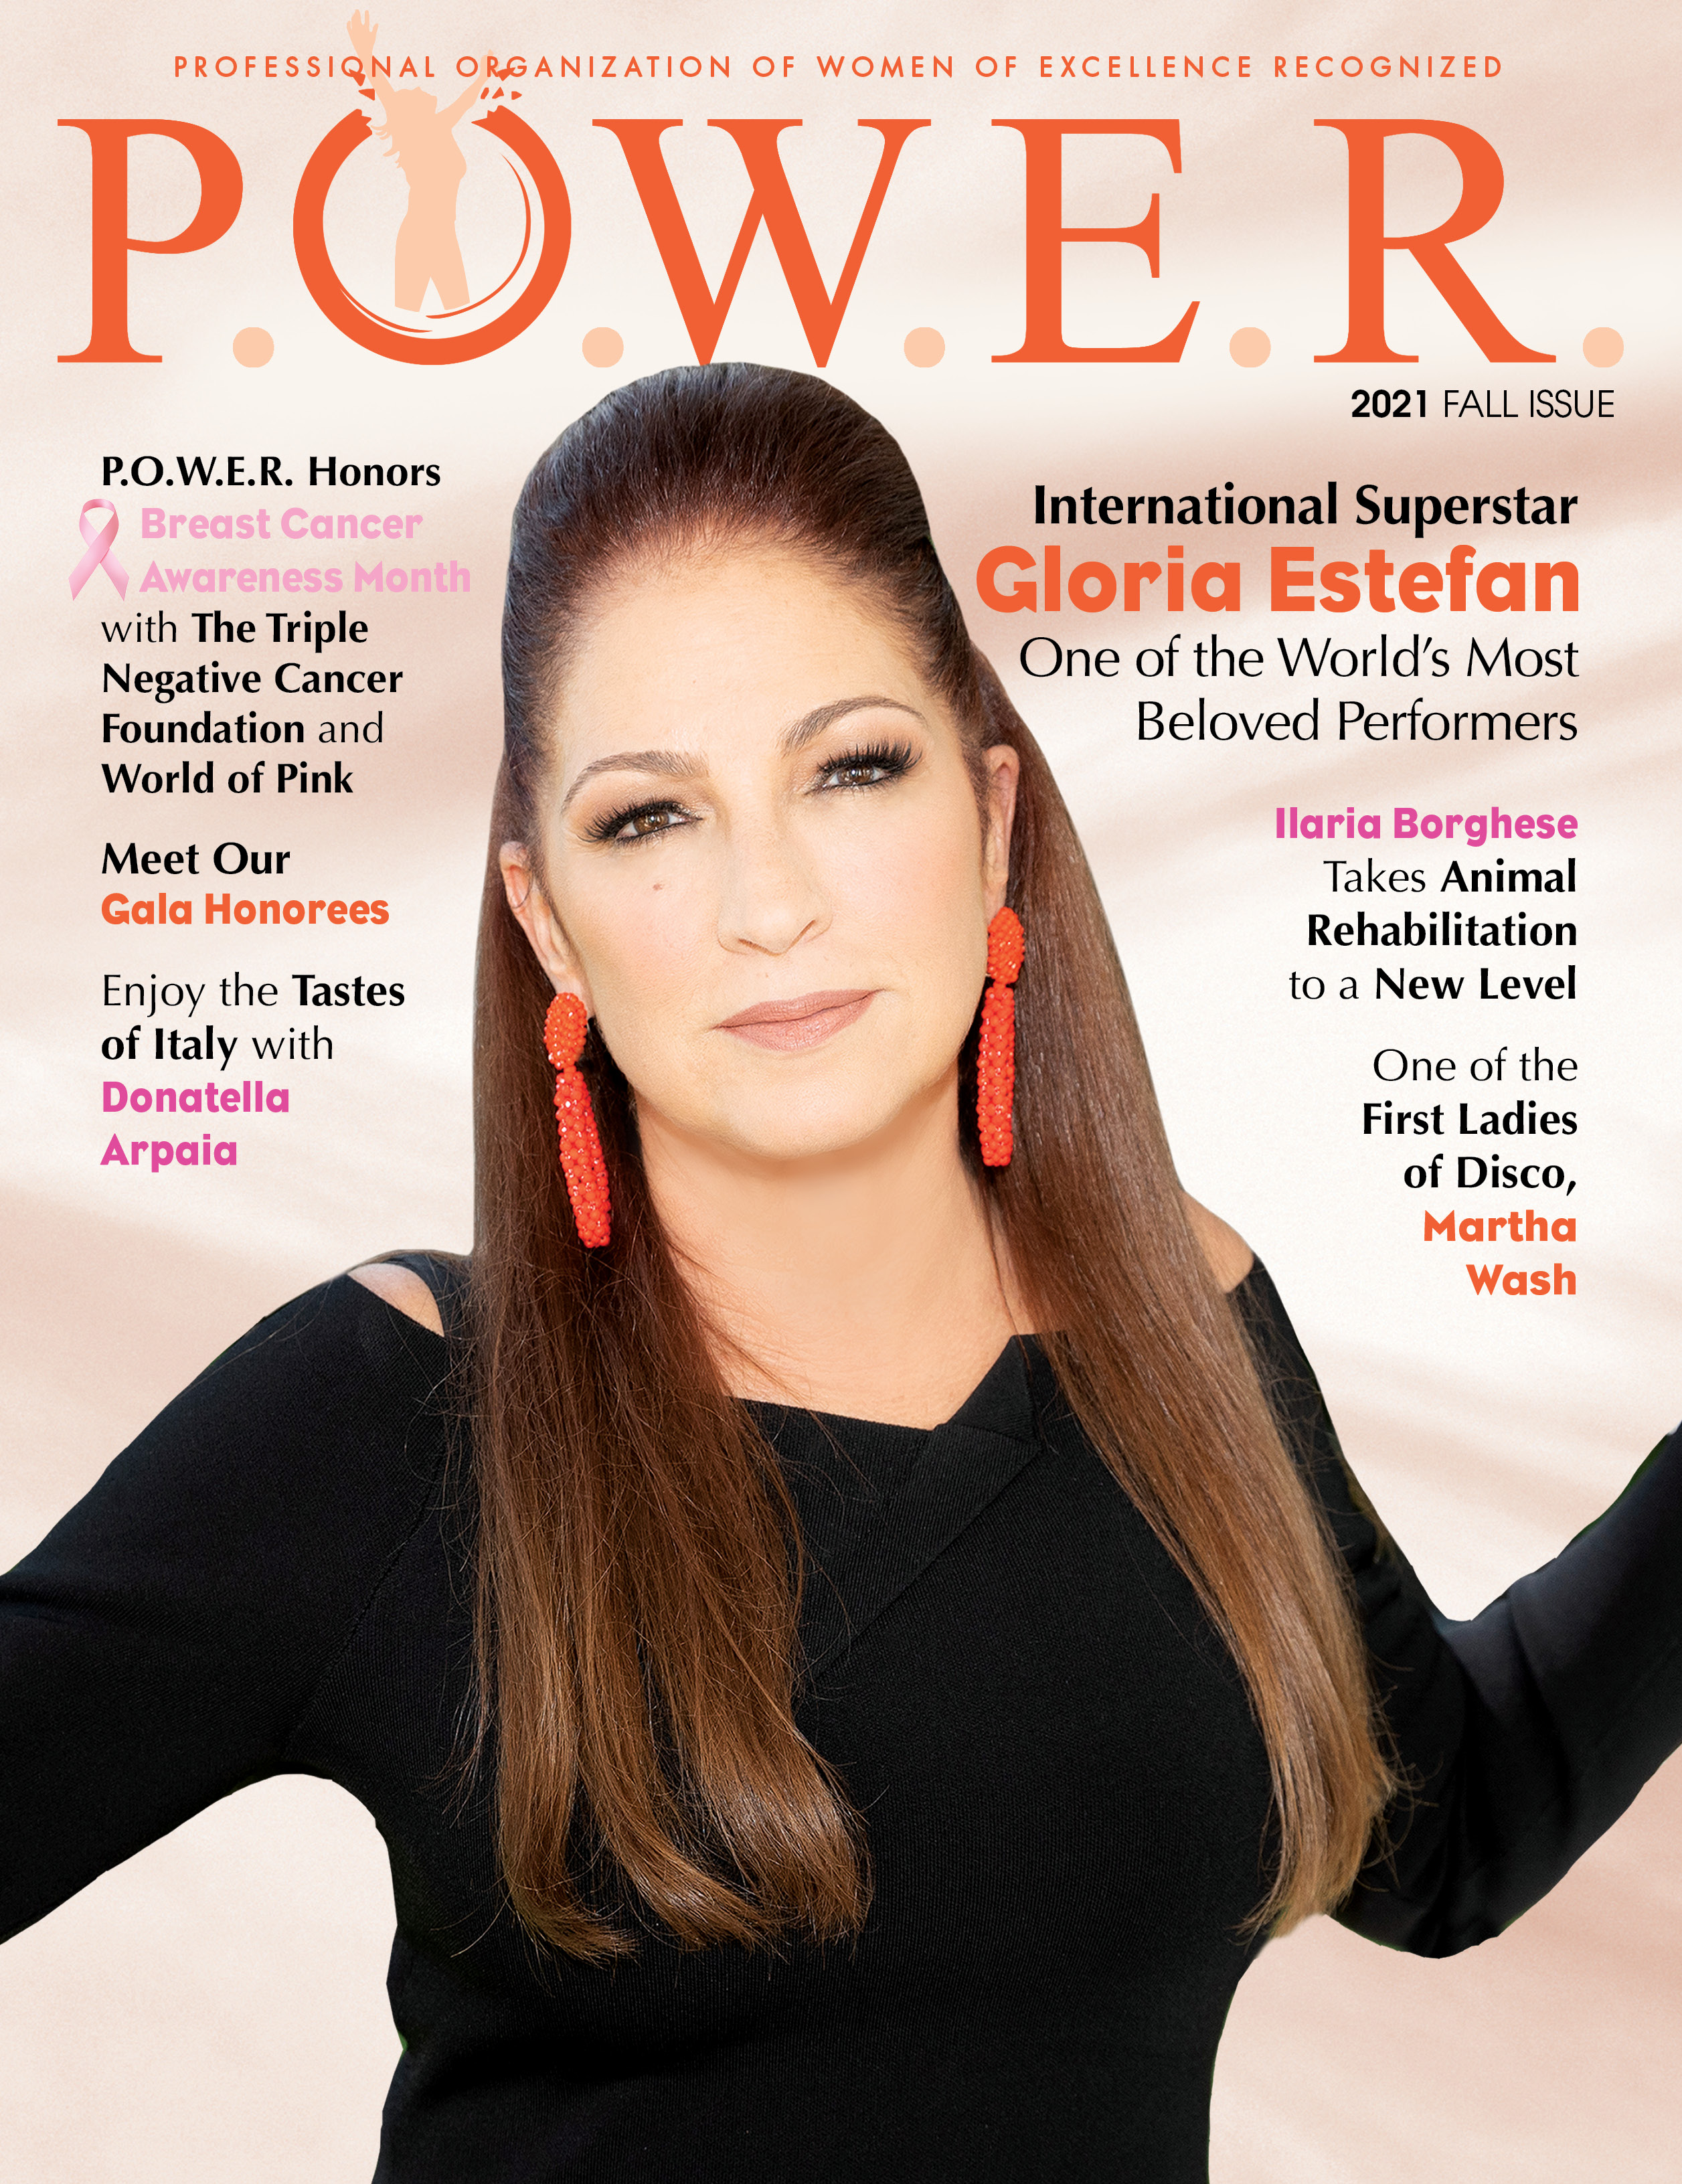 The Fall 2021 Issue of P.O.W.E.R. Magazine Features Women Who Prove They Can Achieve Their Goals with Passion and Hard Work